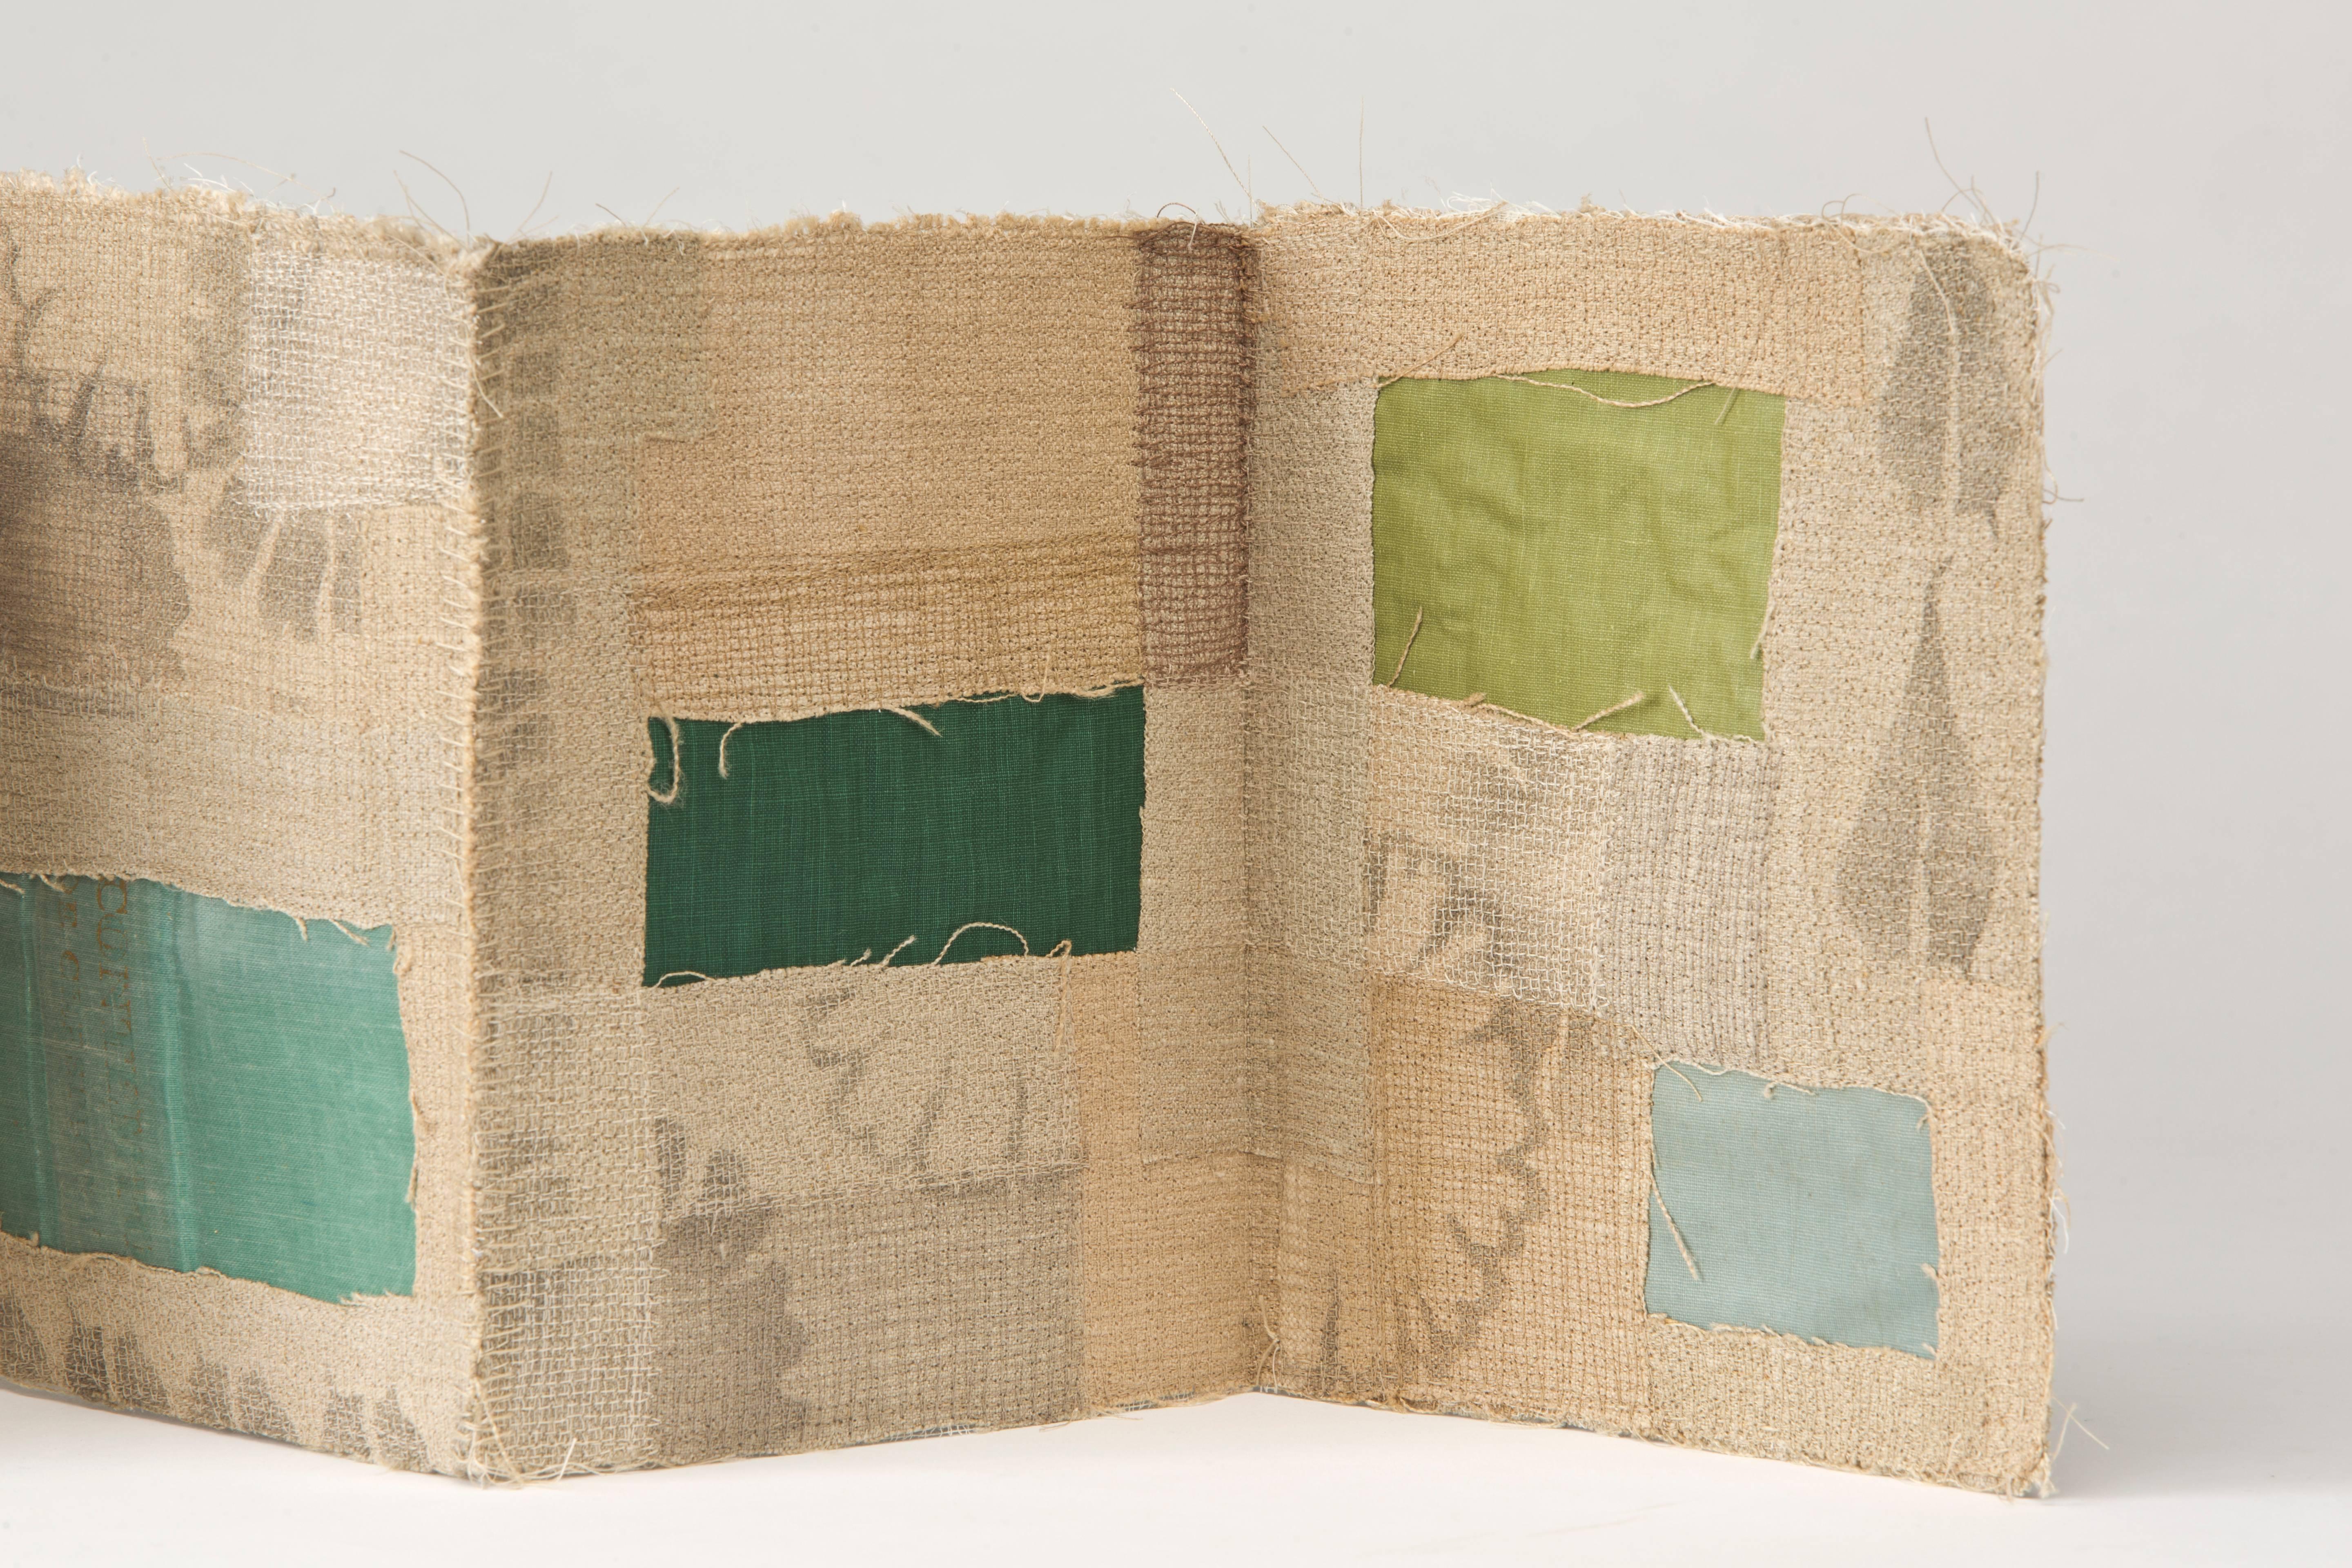 Reclaimed linen, bookcloth from discarded library books, stencils, thread, mull, and custom made clamshell box.